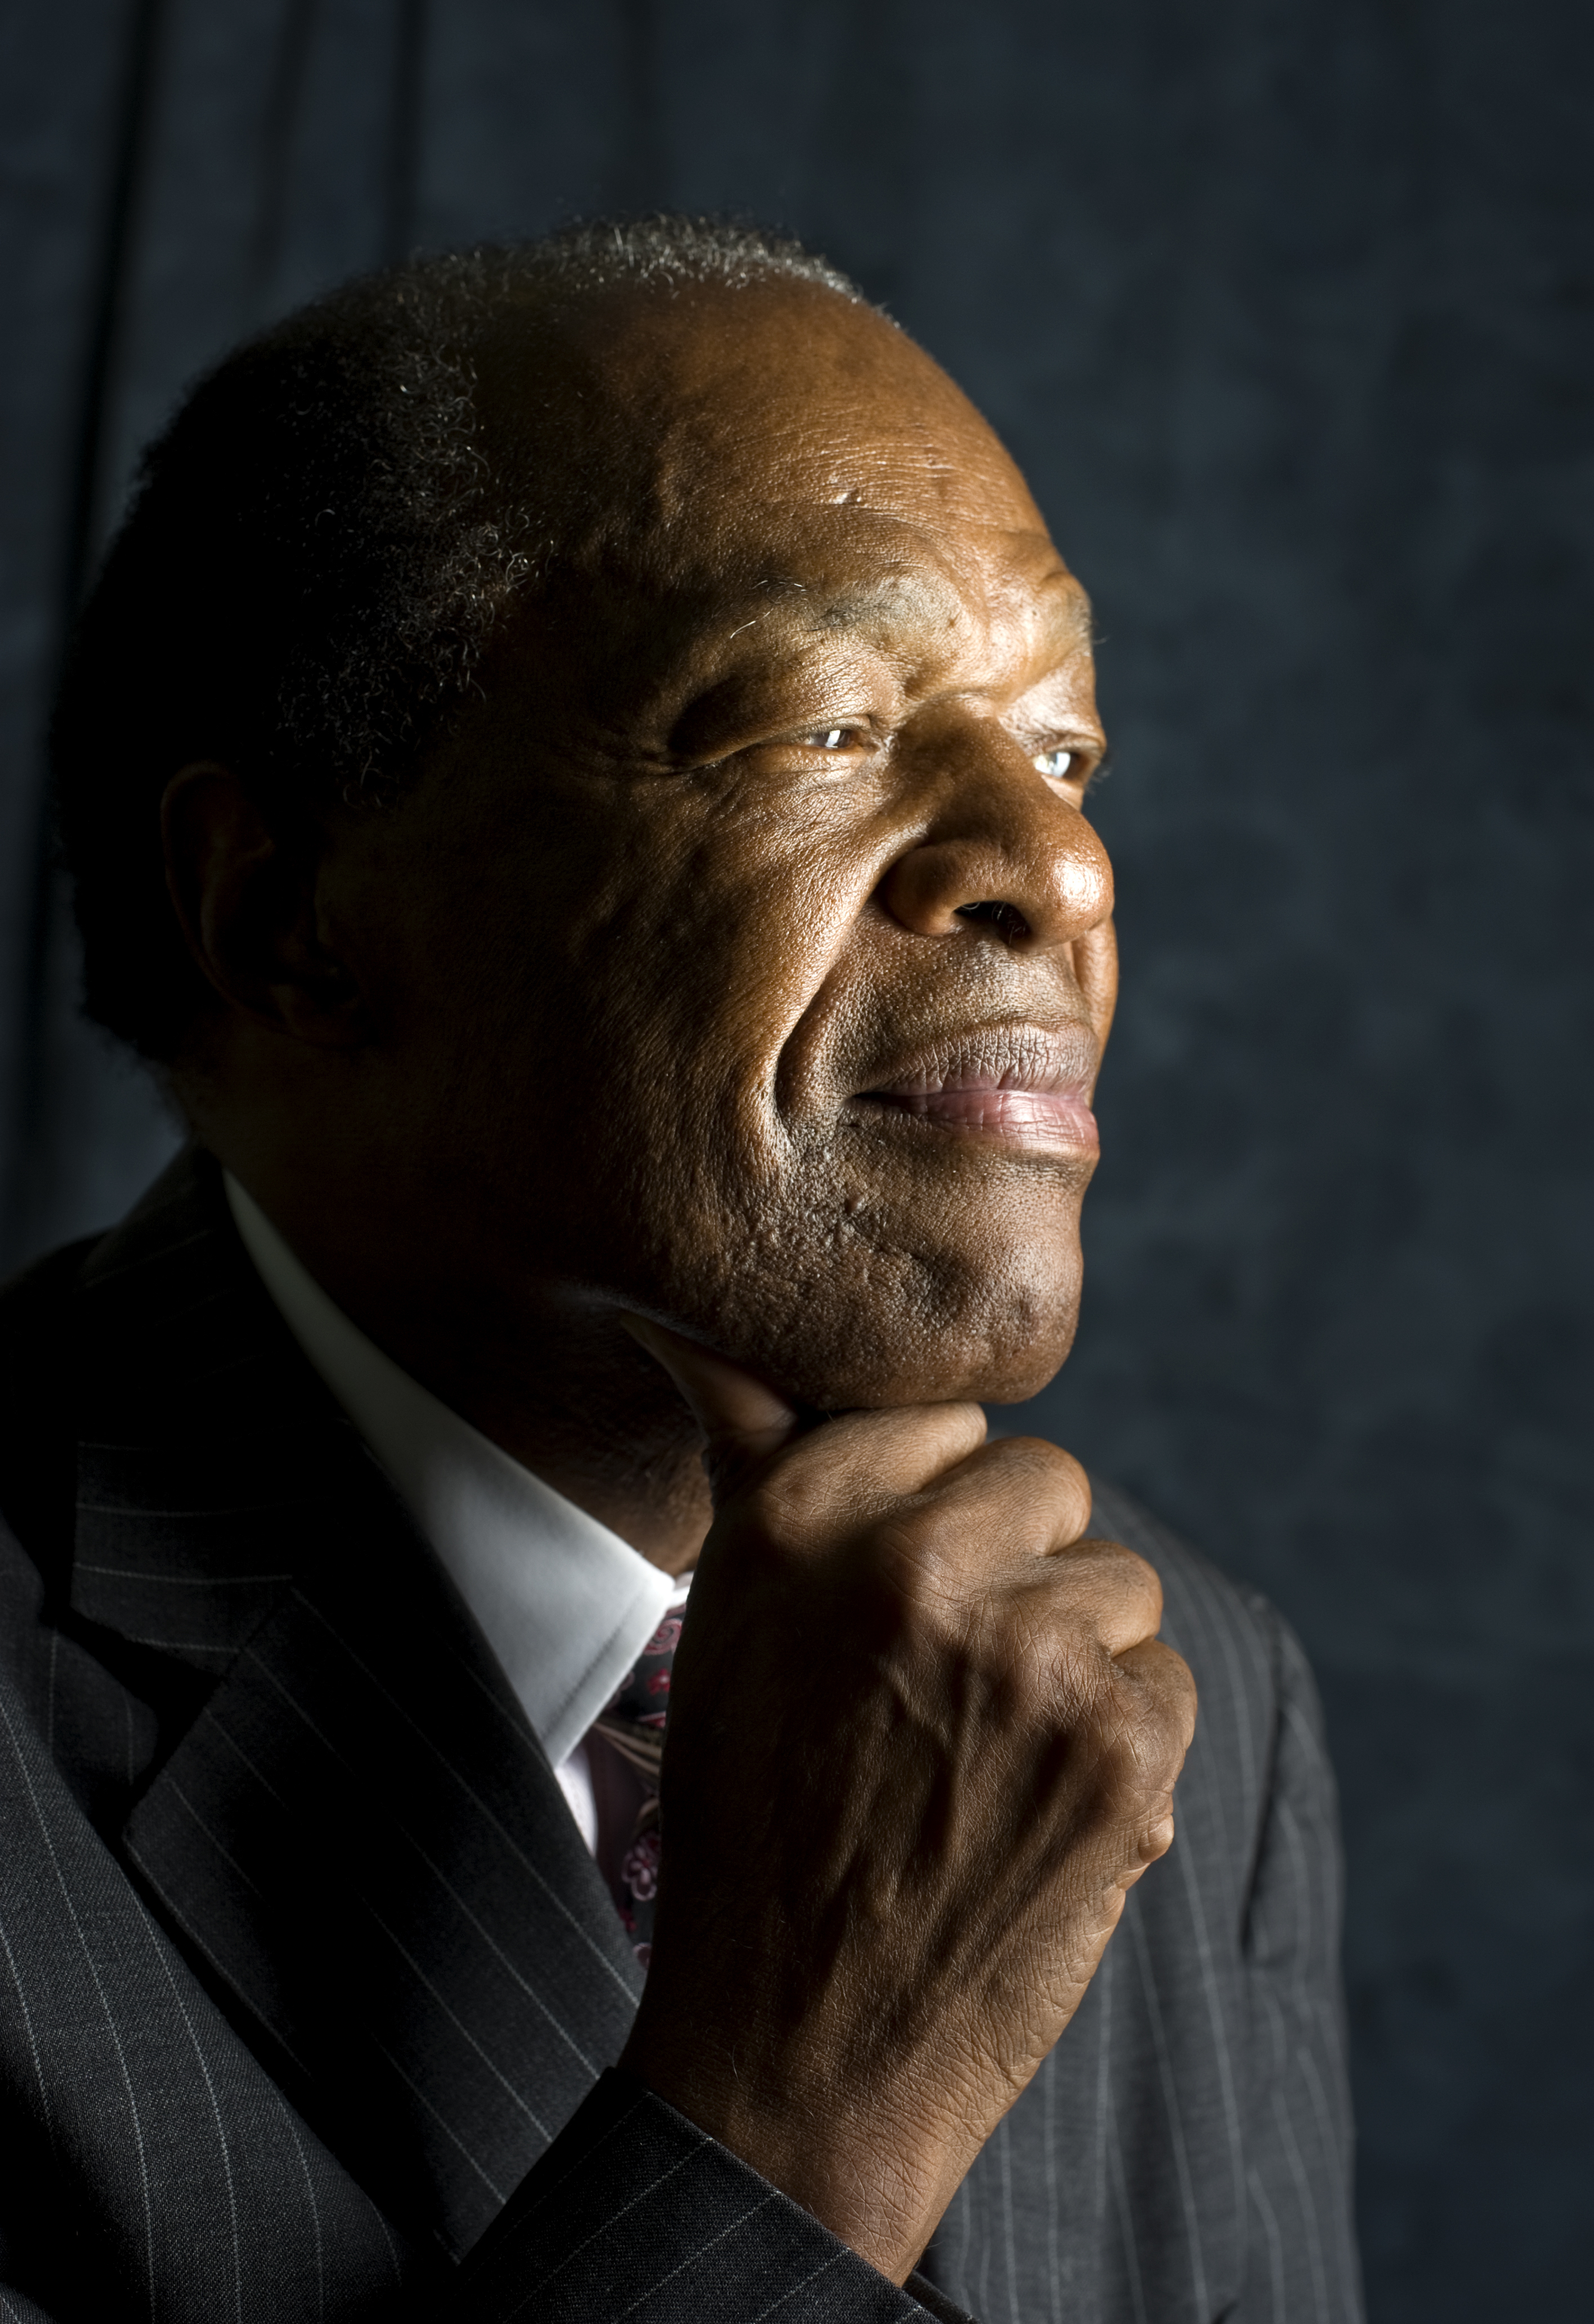 D.C. Council member Marion Barry poses for a portrait in his office in Washington, D.C., on July 6, 2011. (Nikki Kahn—The Washington Post/Getty Images)